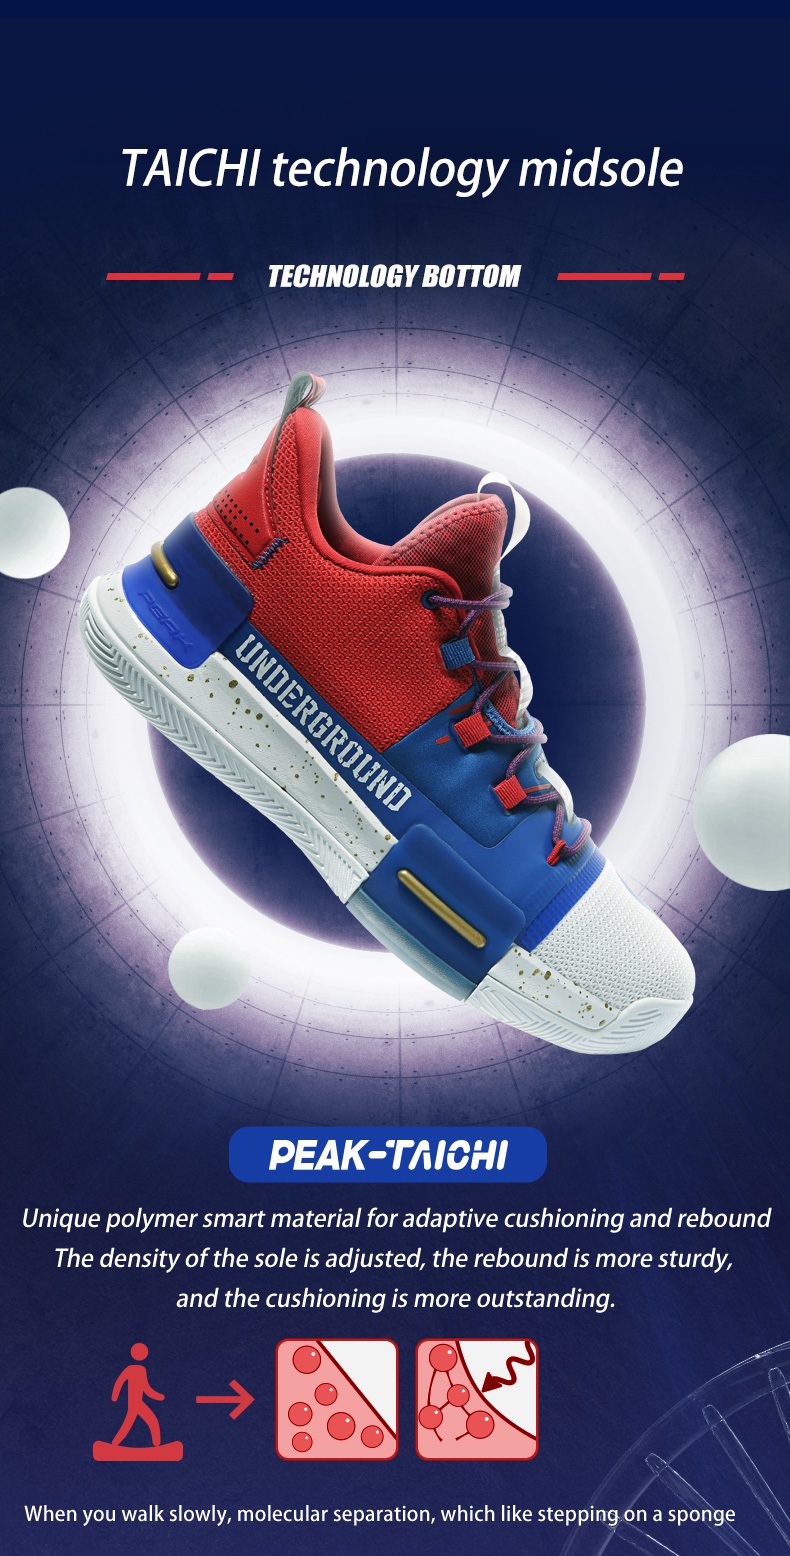 PEAK Professional Mens Basketball Shoes Outdoor Sneakers Men Wear Resistant Light Cushioning Breathable Sport Shoes Male